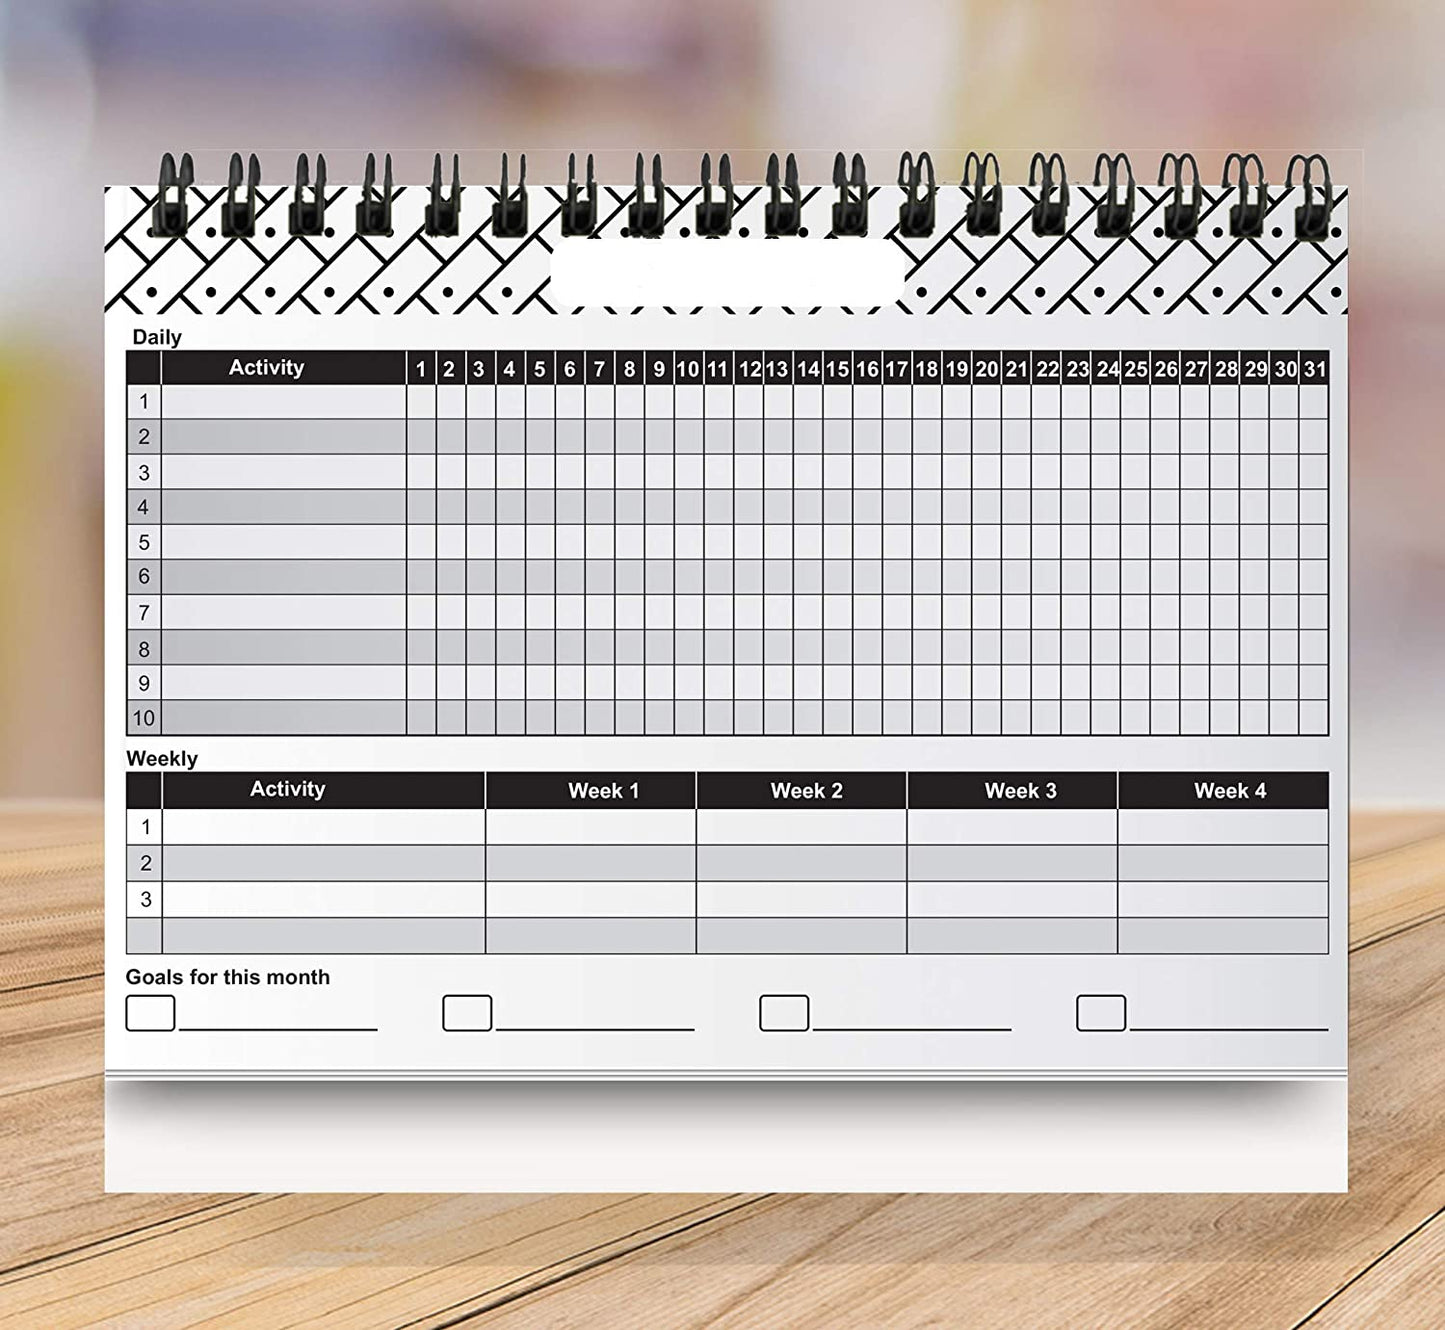 AccuPrints Habit Development (Any Year) Planner for Desk for Personal use